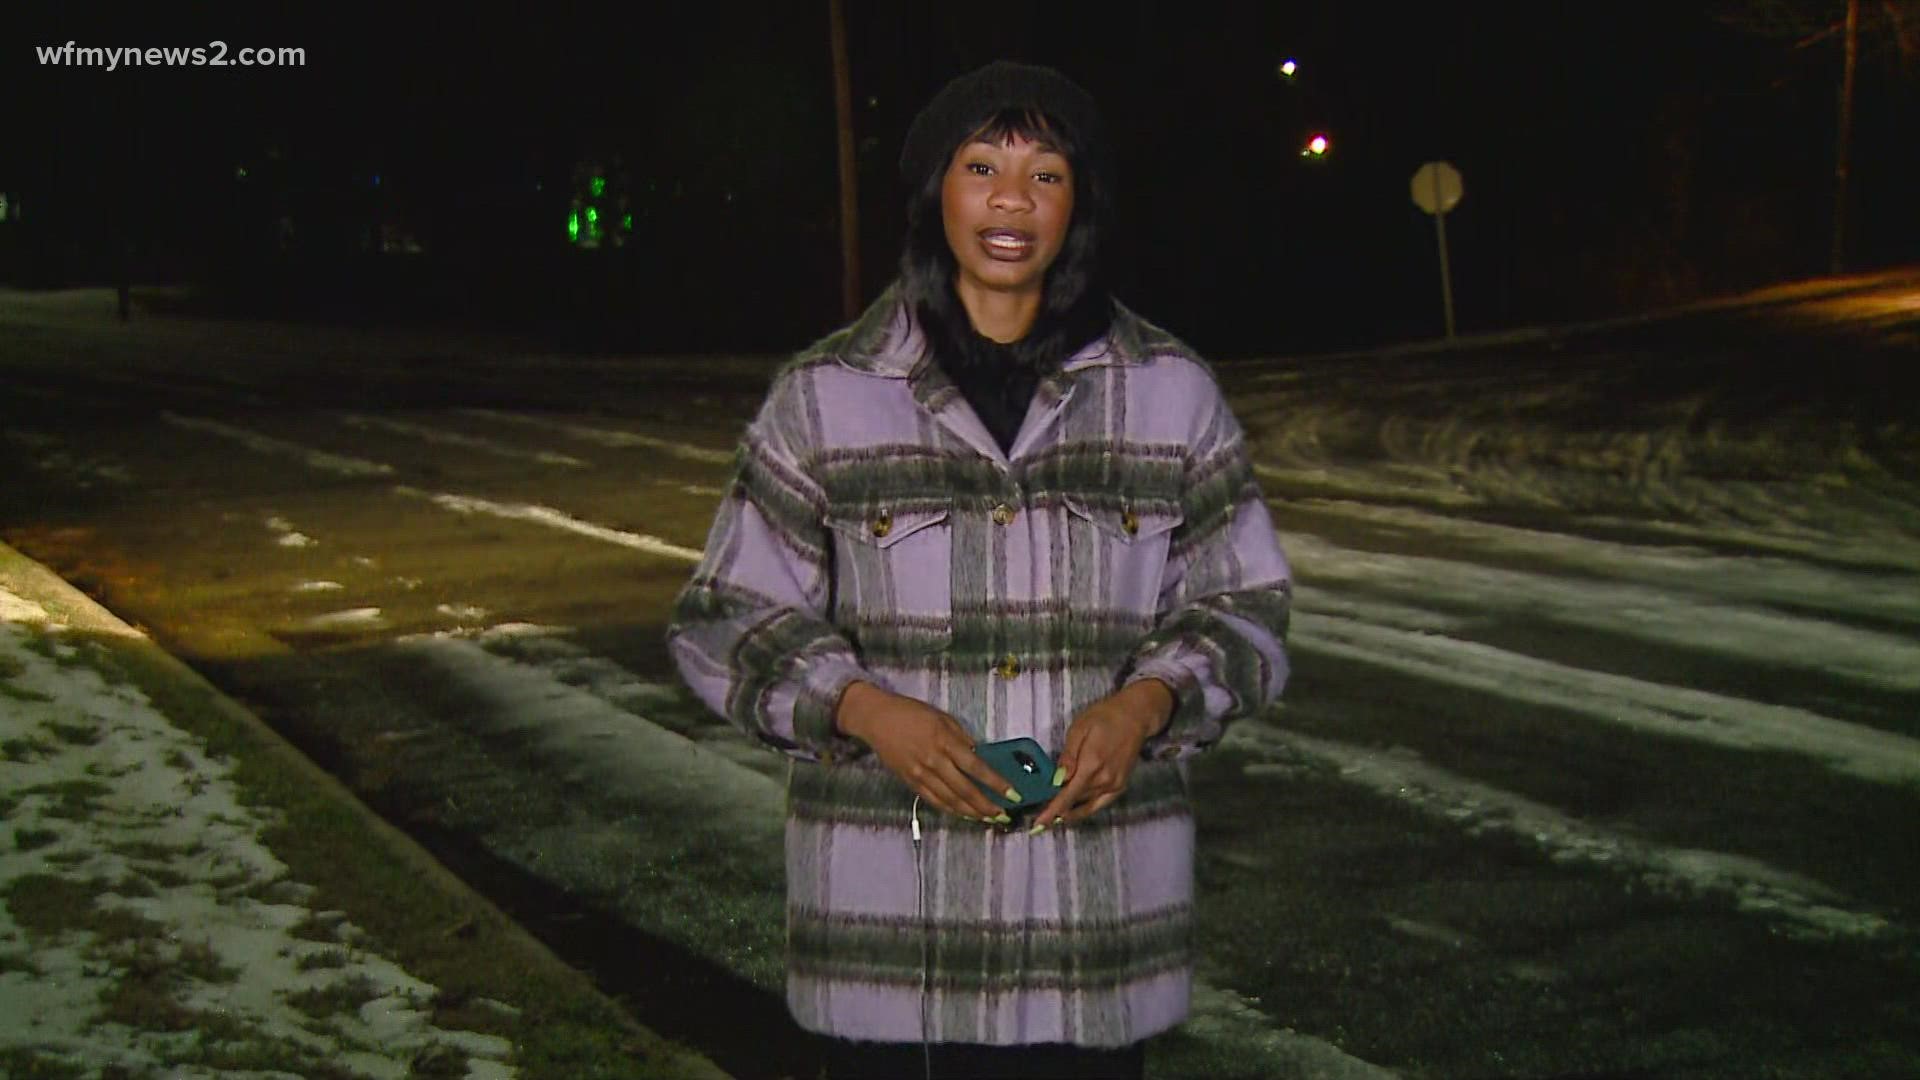 WFMY News 2's Itinease McMiller gives us a look at icy neighborhood streets. It's what made Guilford County schools go remote for a second day.